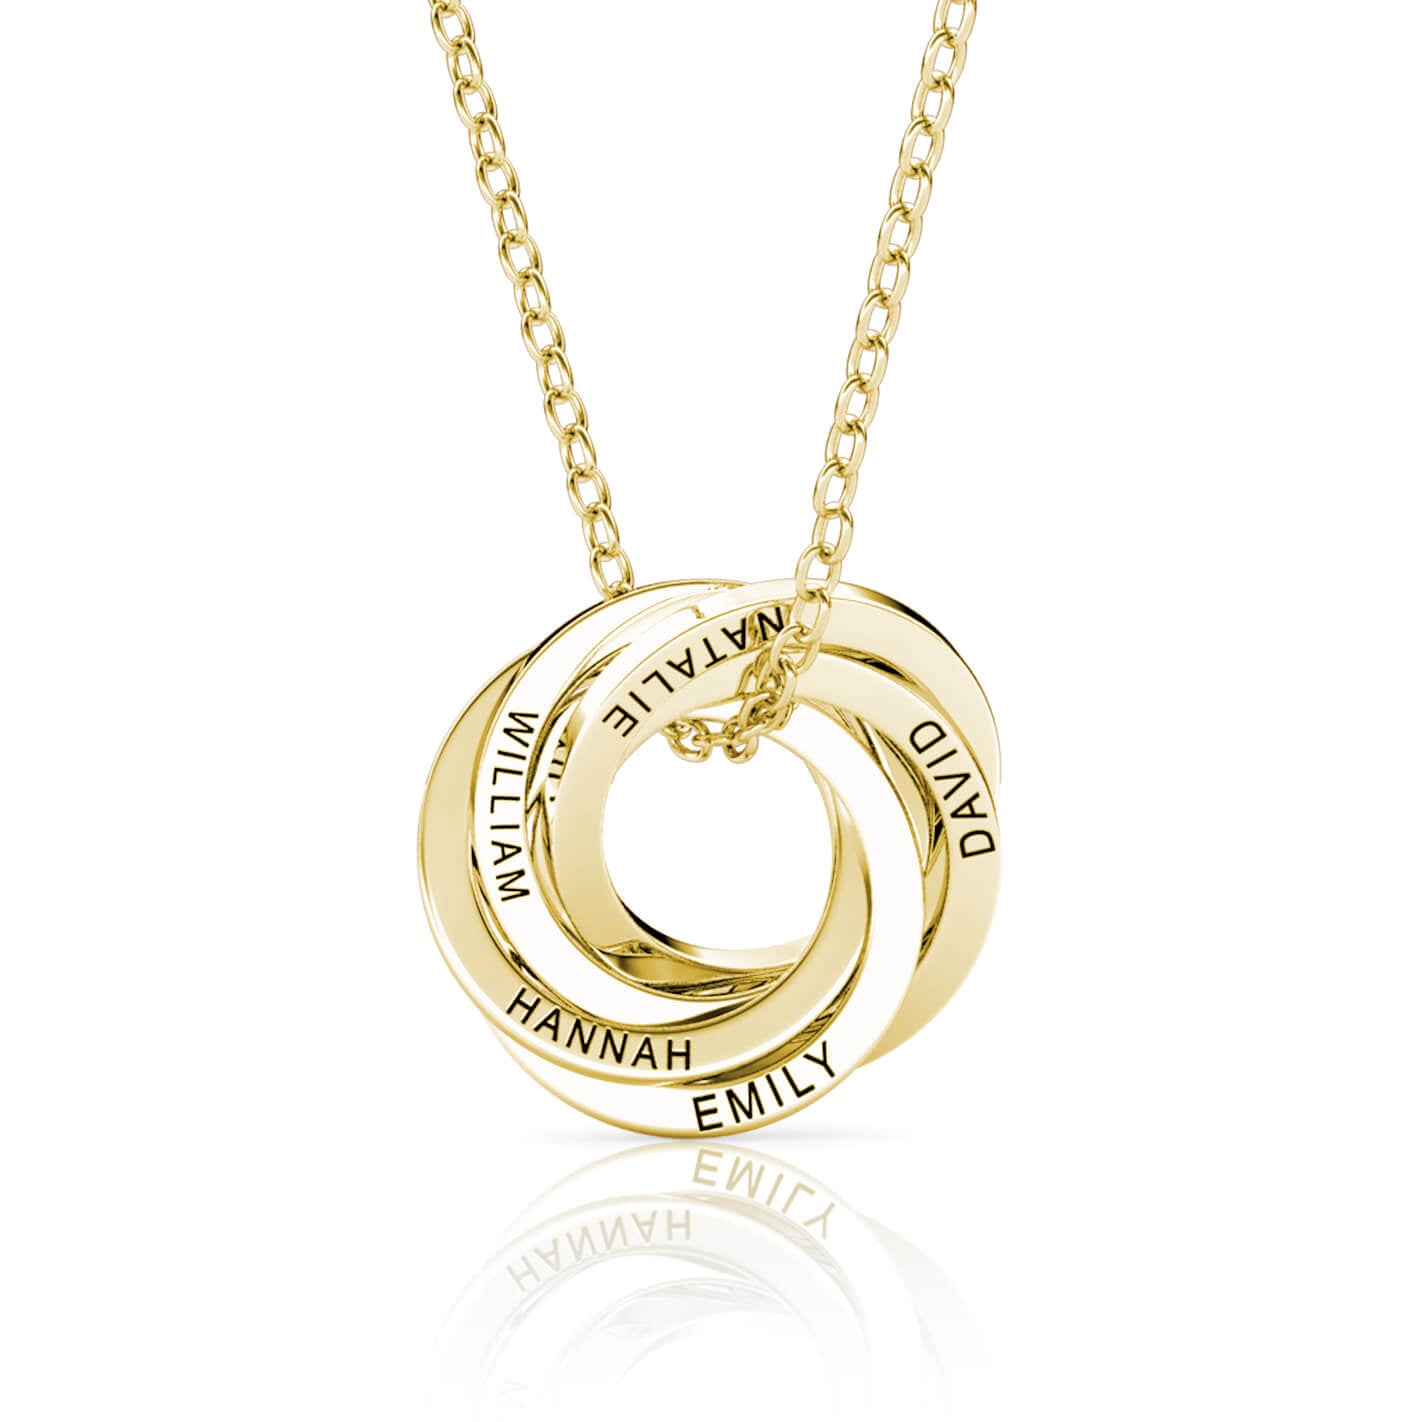 Russian wedding ring pendant necklace – Becky Pearce Designs